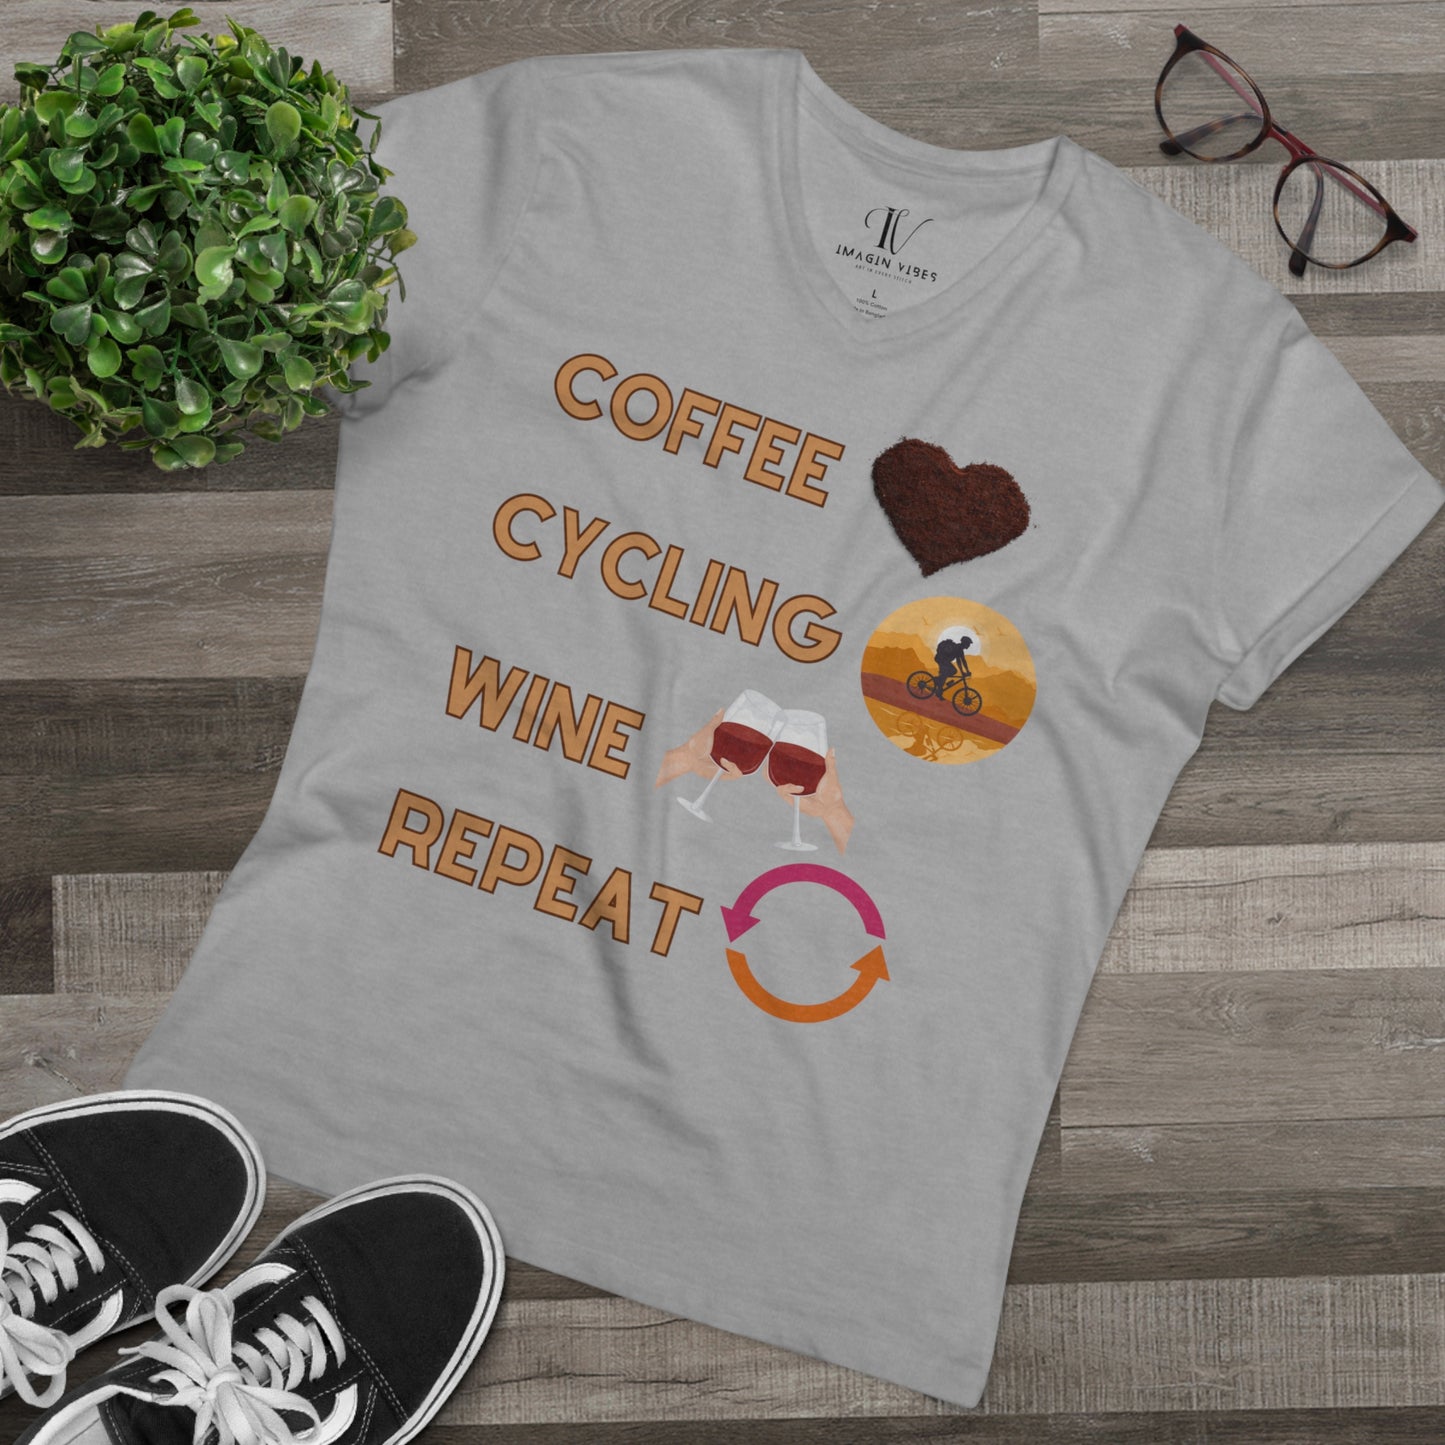 Minimalistic Bicycle T-Shirt for Men - Cotton Shirts, Eco-Friendly Gift for Coffee and Cycling Enthusiasts V-neck Heather Grey S 